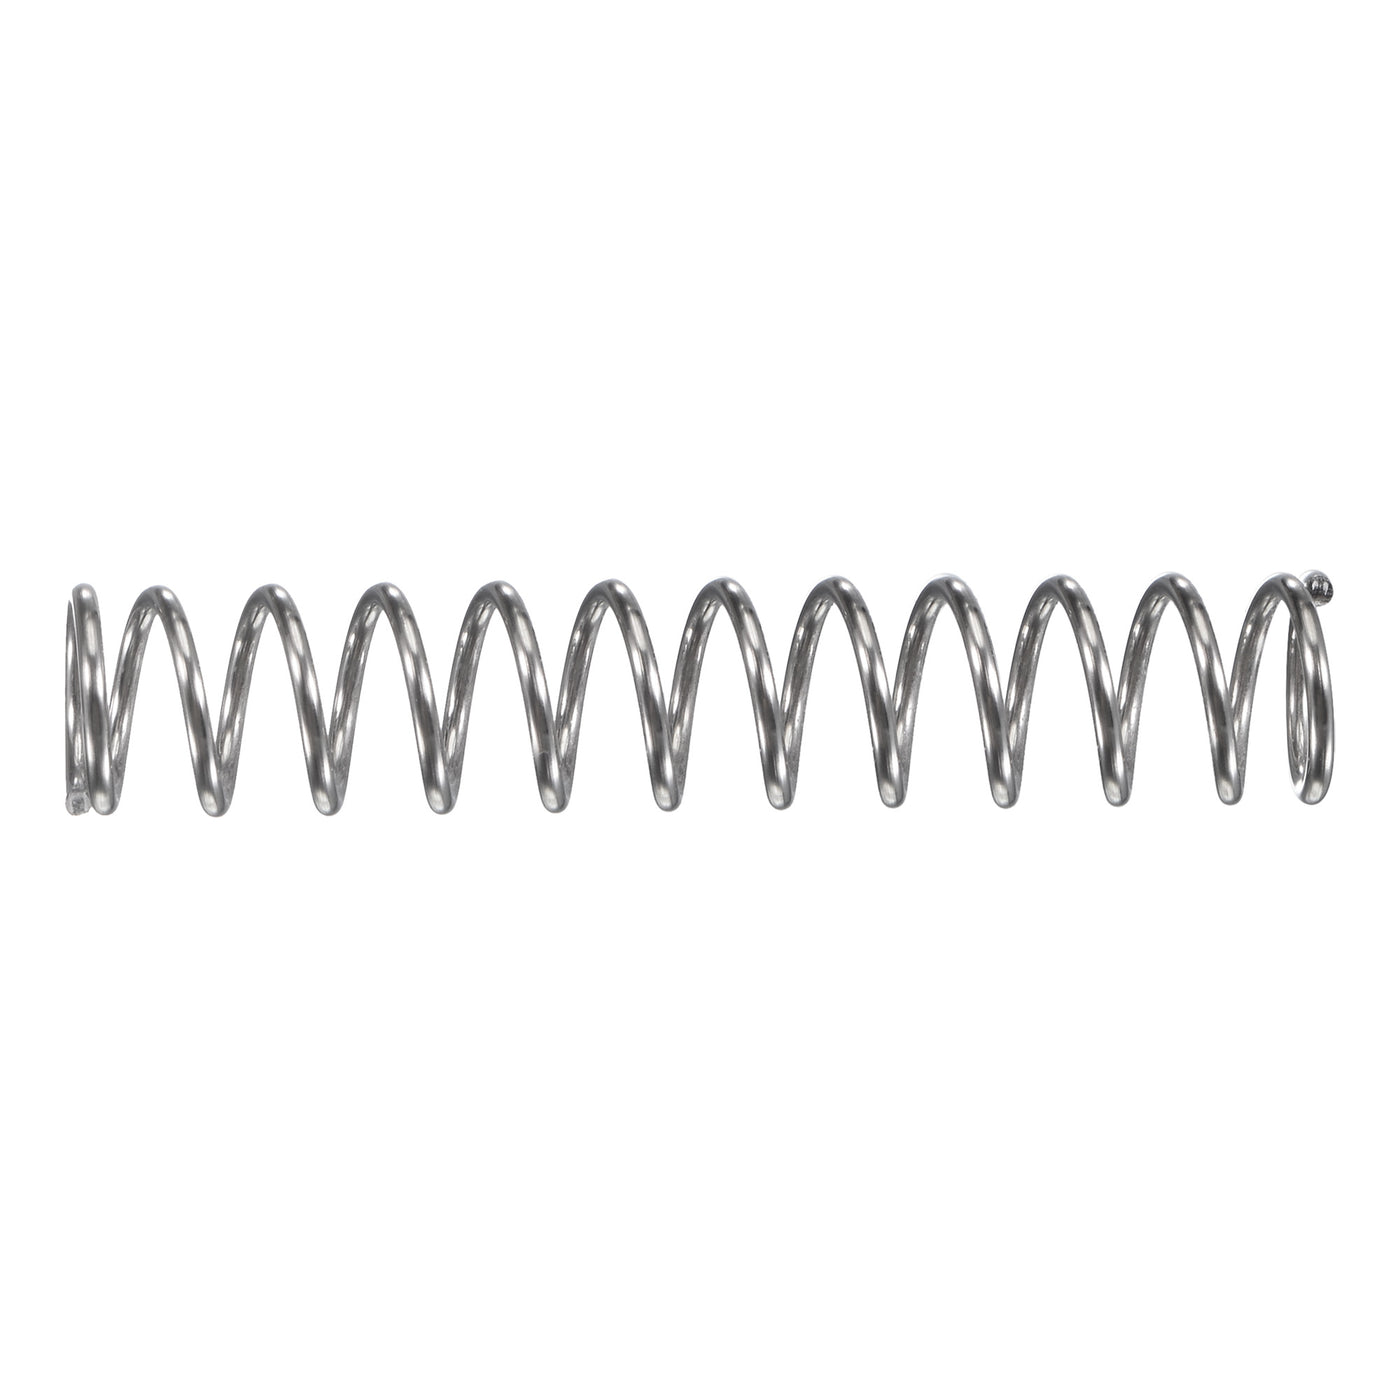 uxcell Uxcell 7mmx0.8mmx35mm 304 Stainless Steel Compression Spring 17.2N Load Capacity 30pcs